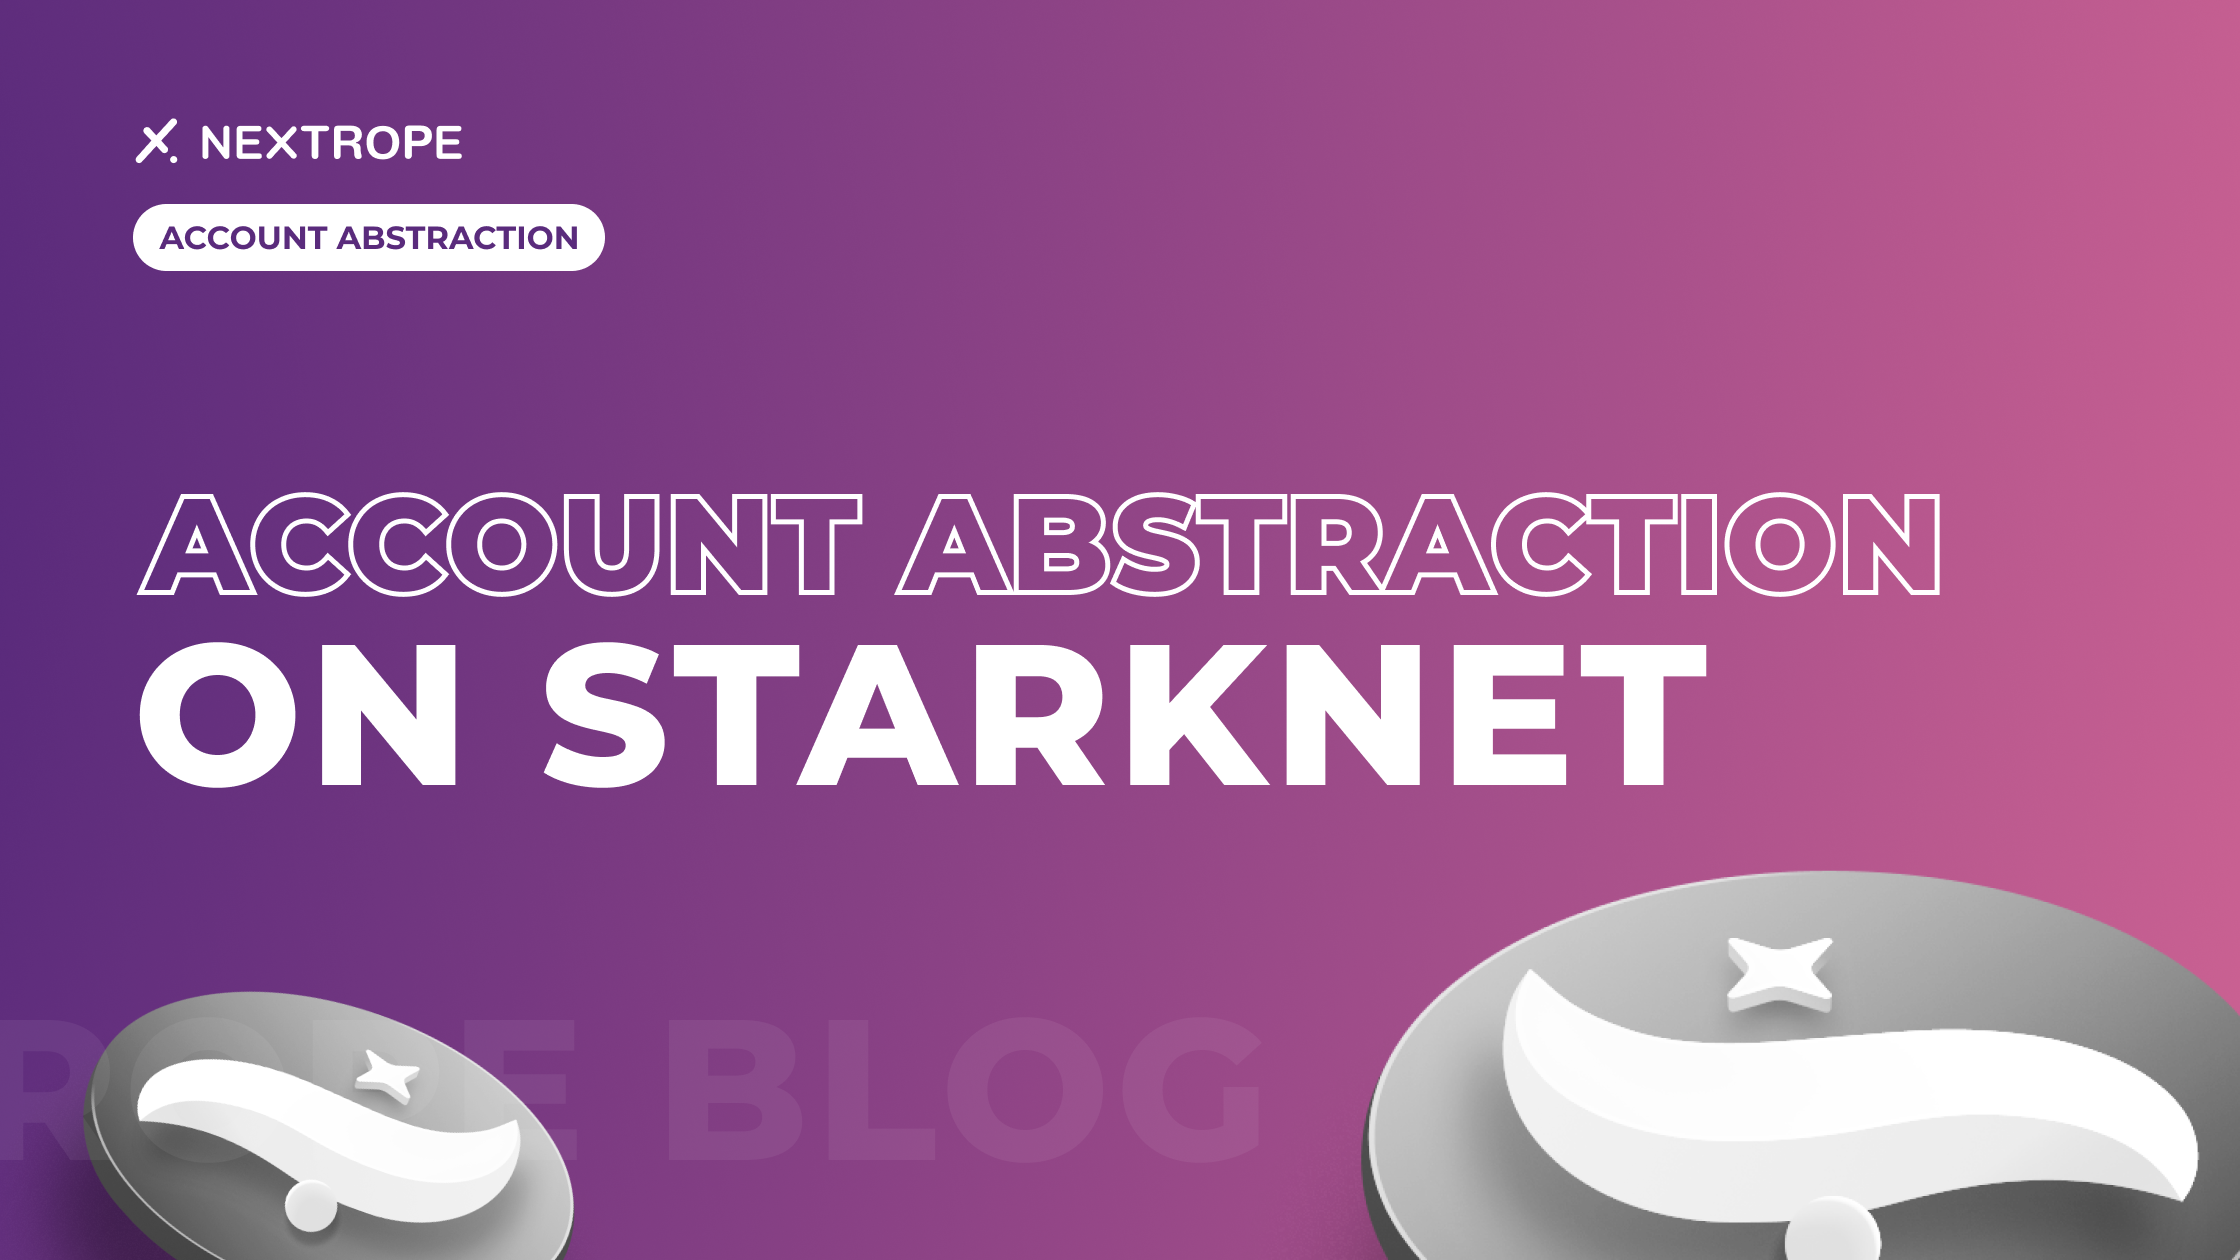 Account Abstraction on Starknet